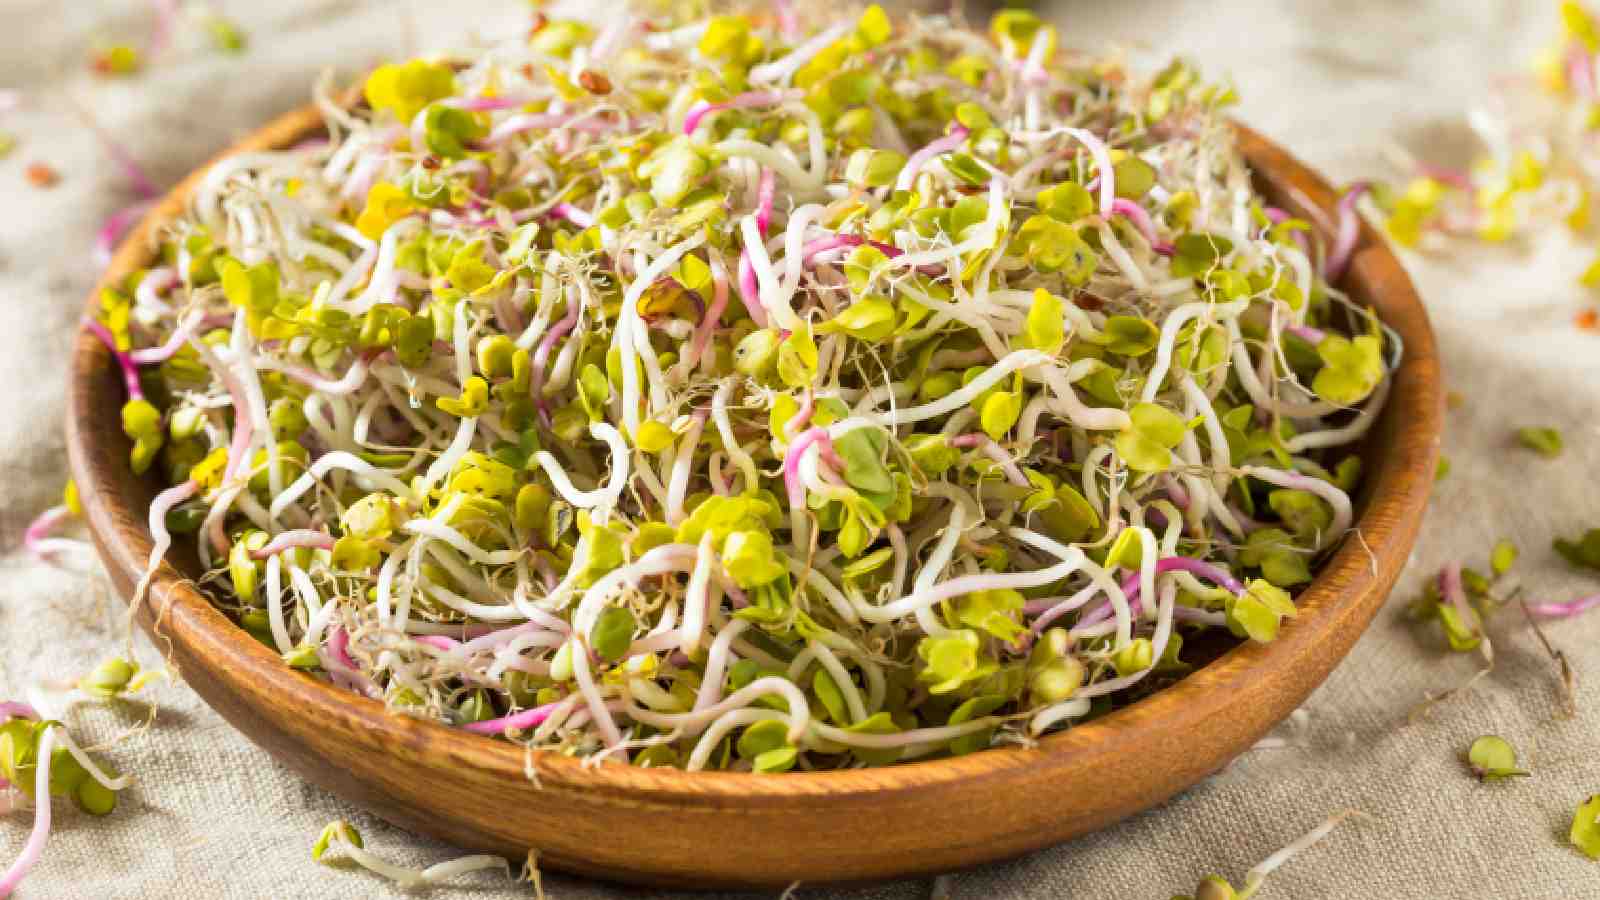 Sprouts are perfect immunity booster! Here’s why